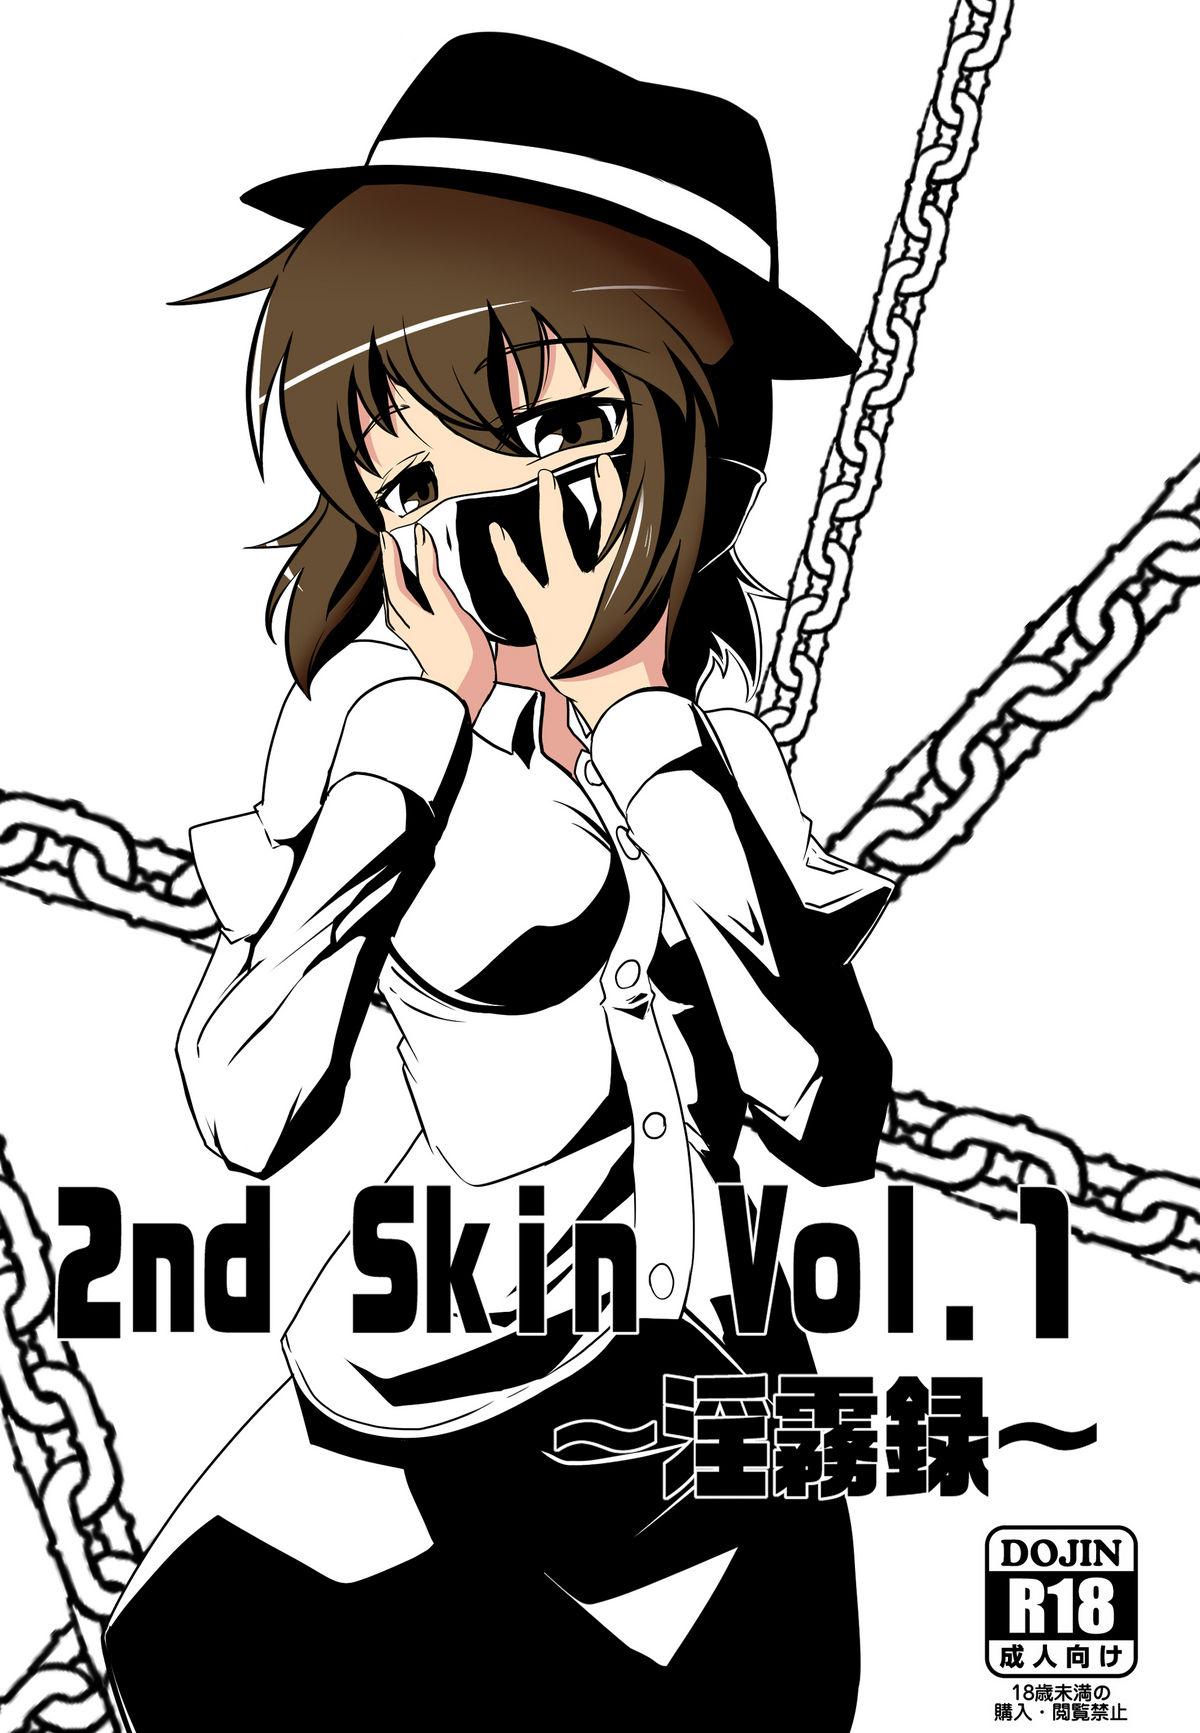 2nd Skin Vol.1 ～淫霧録～ [にゃんこの目 (たまっこ)] (東方Project) [英訳] [DL版] 0